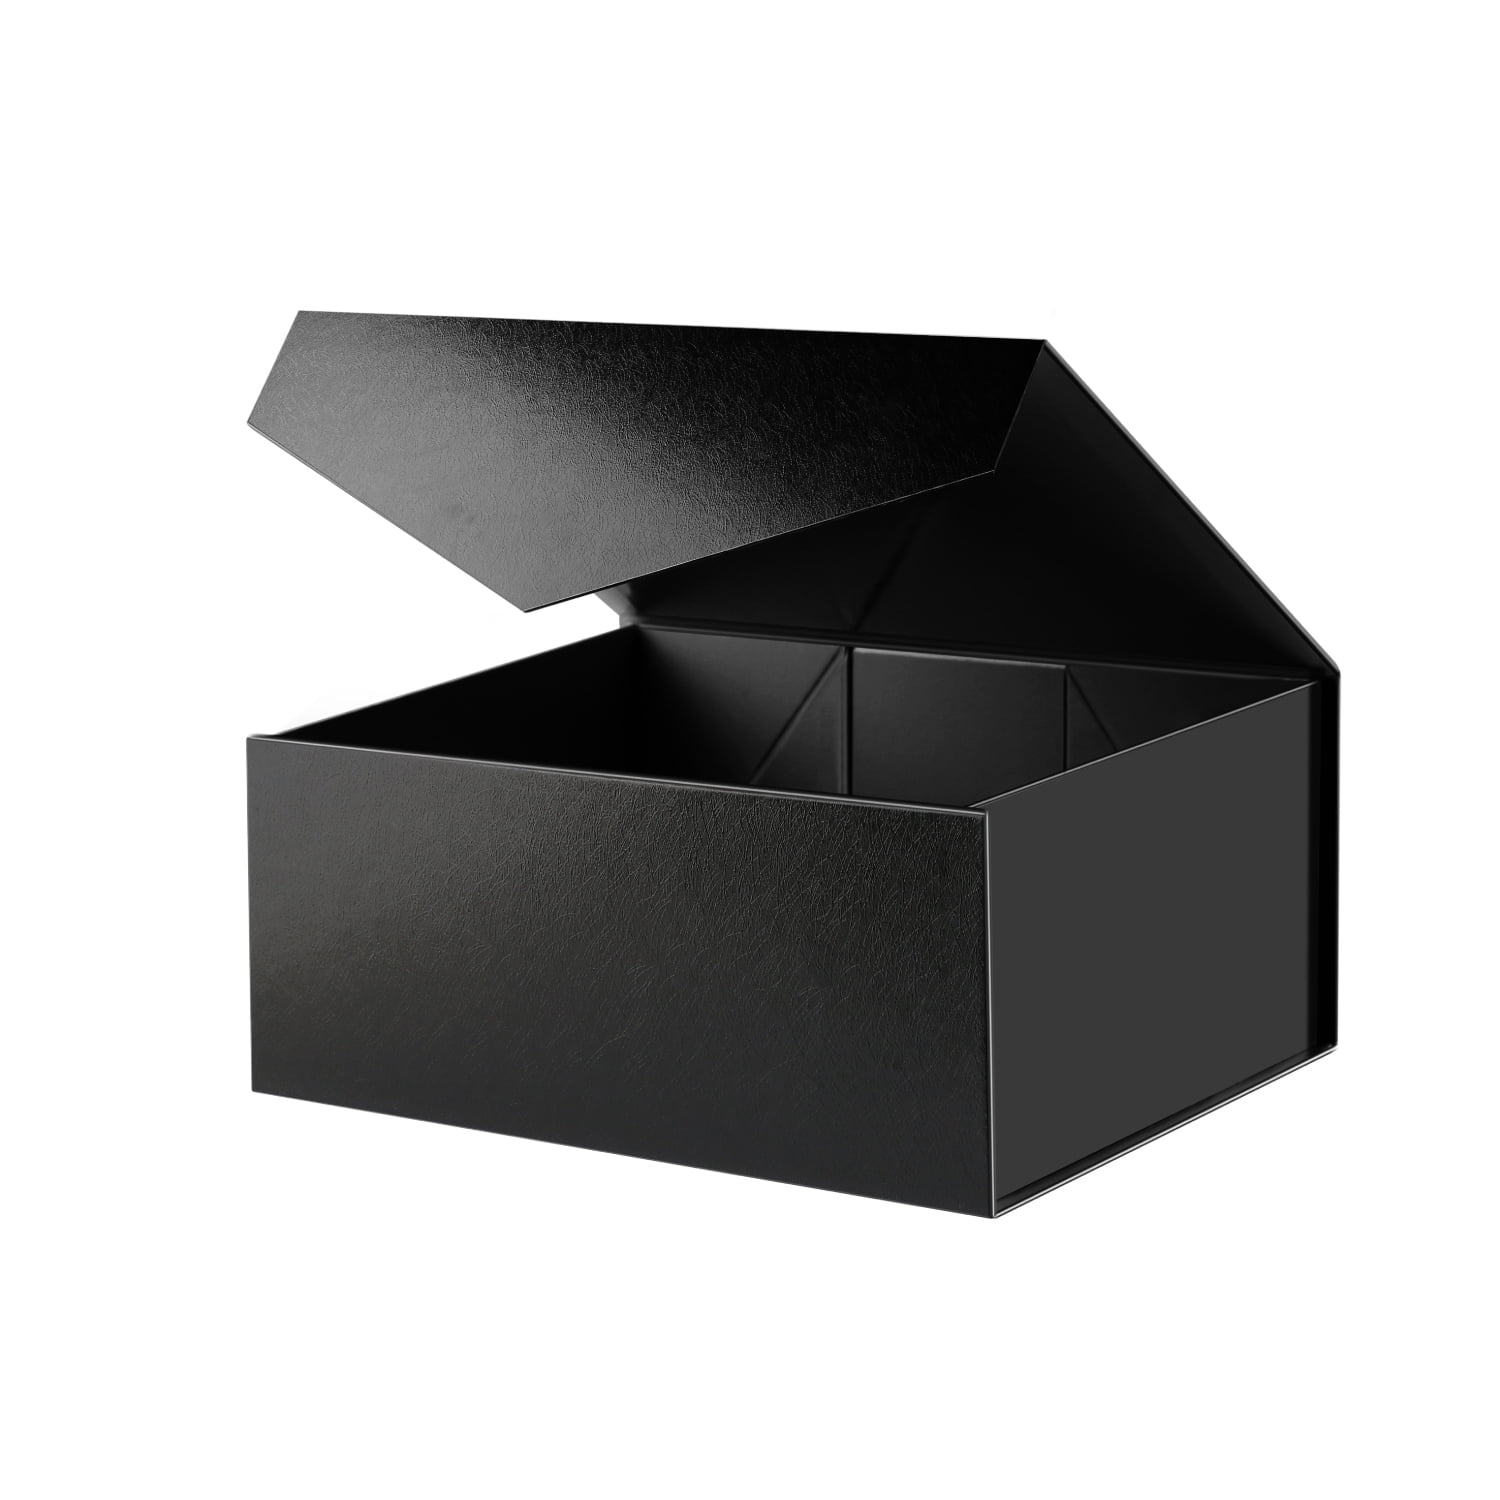 Groomsman Box,Collapsible Gift Box with Magnetic Closure Black Gift Box Gift Box with Lid JINMING Gift Box 9.5x7x4 Inches 